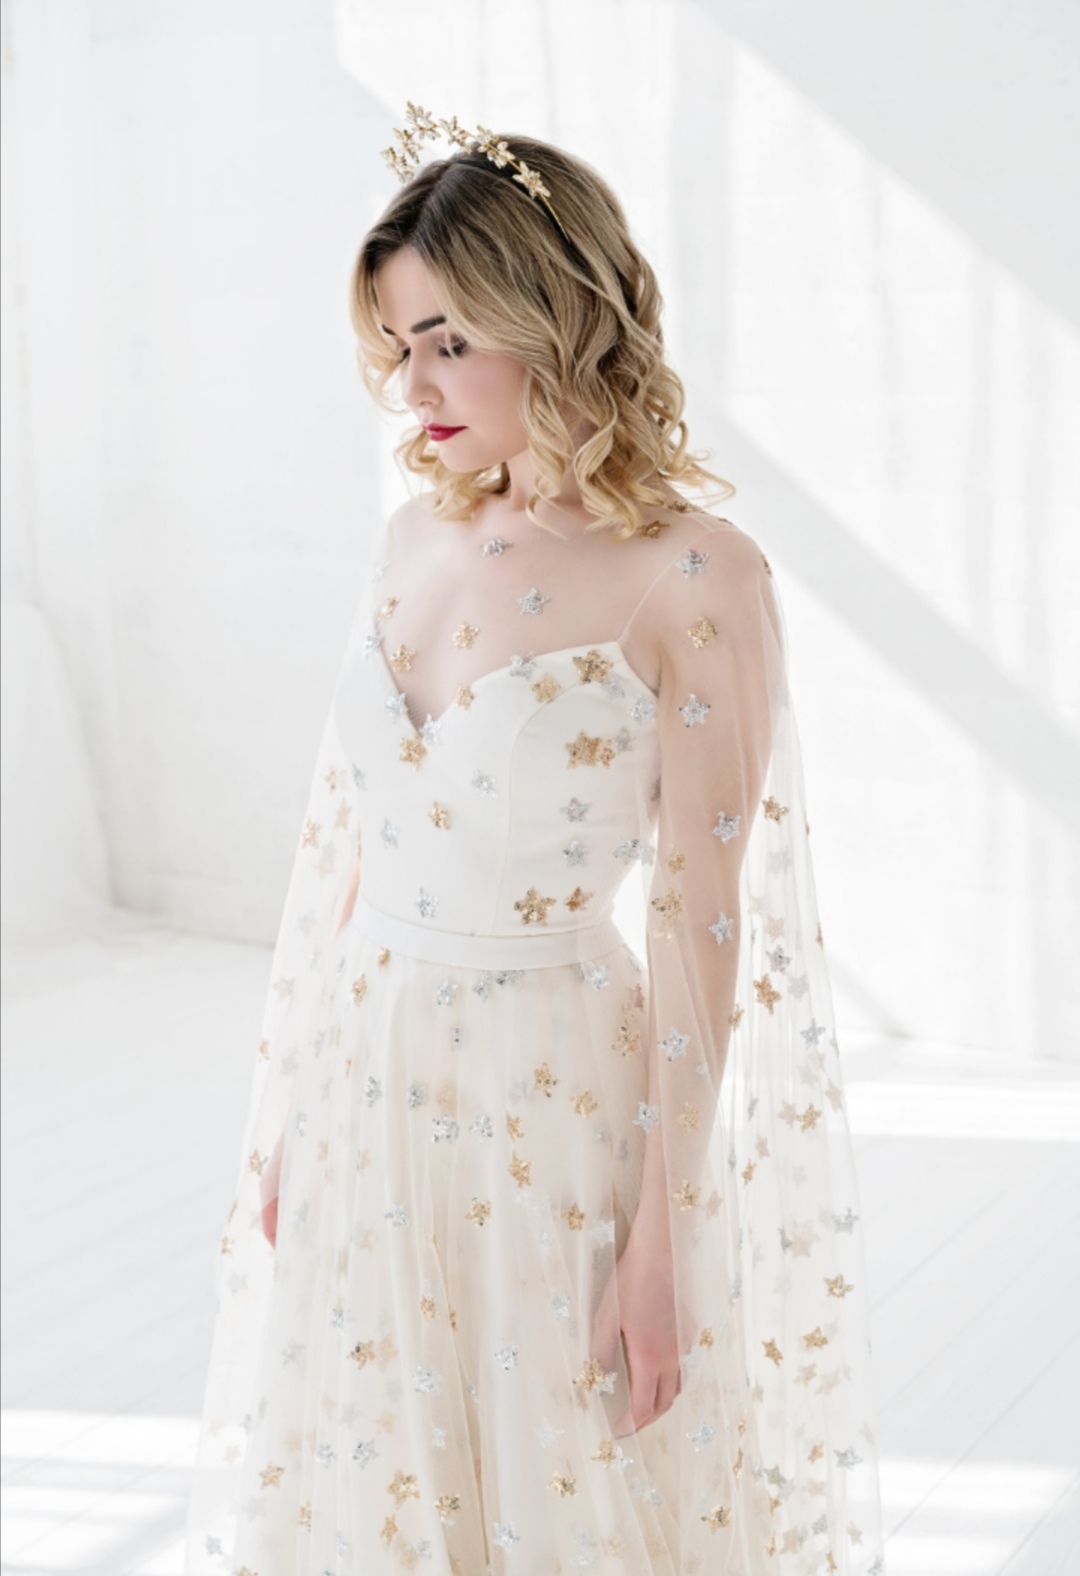 15 Star wedding dresses to obsess over